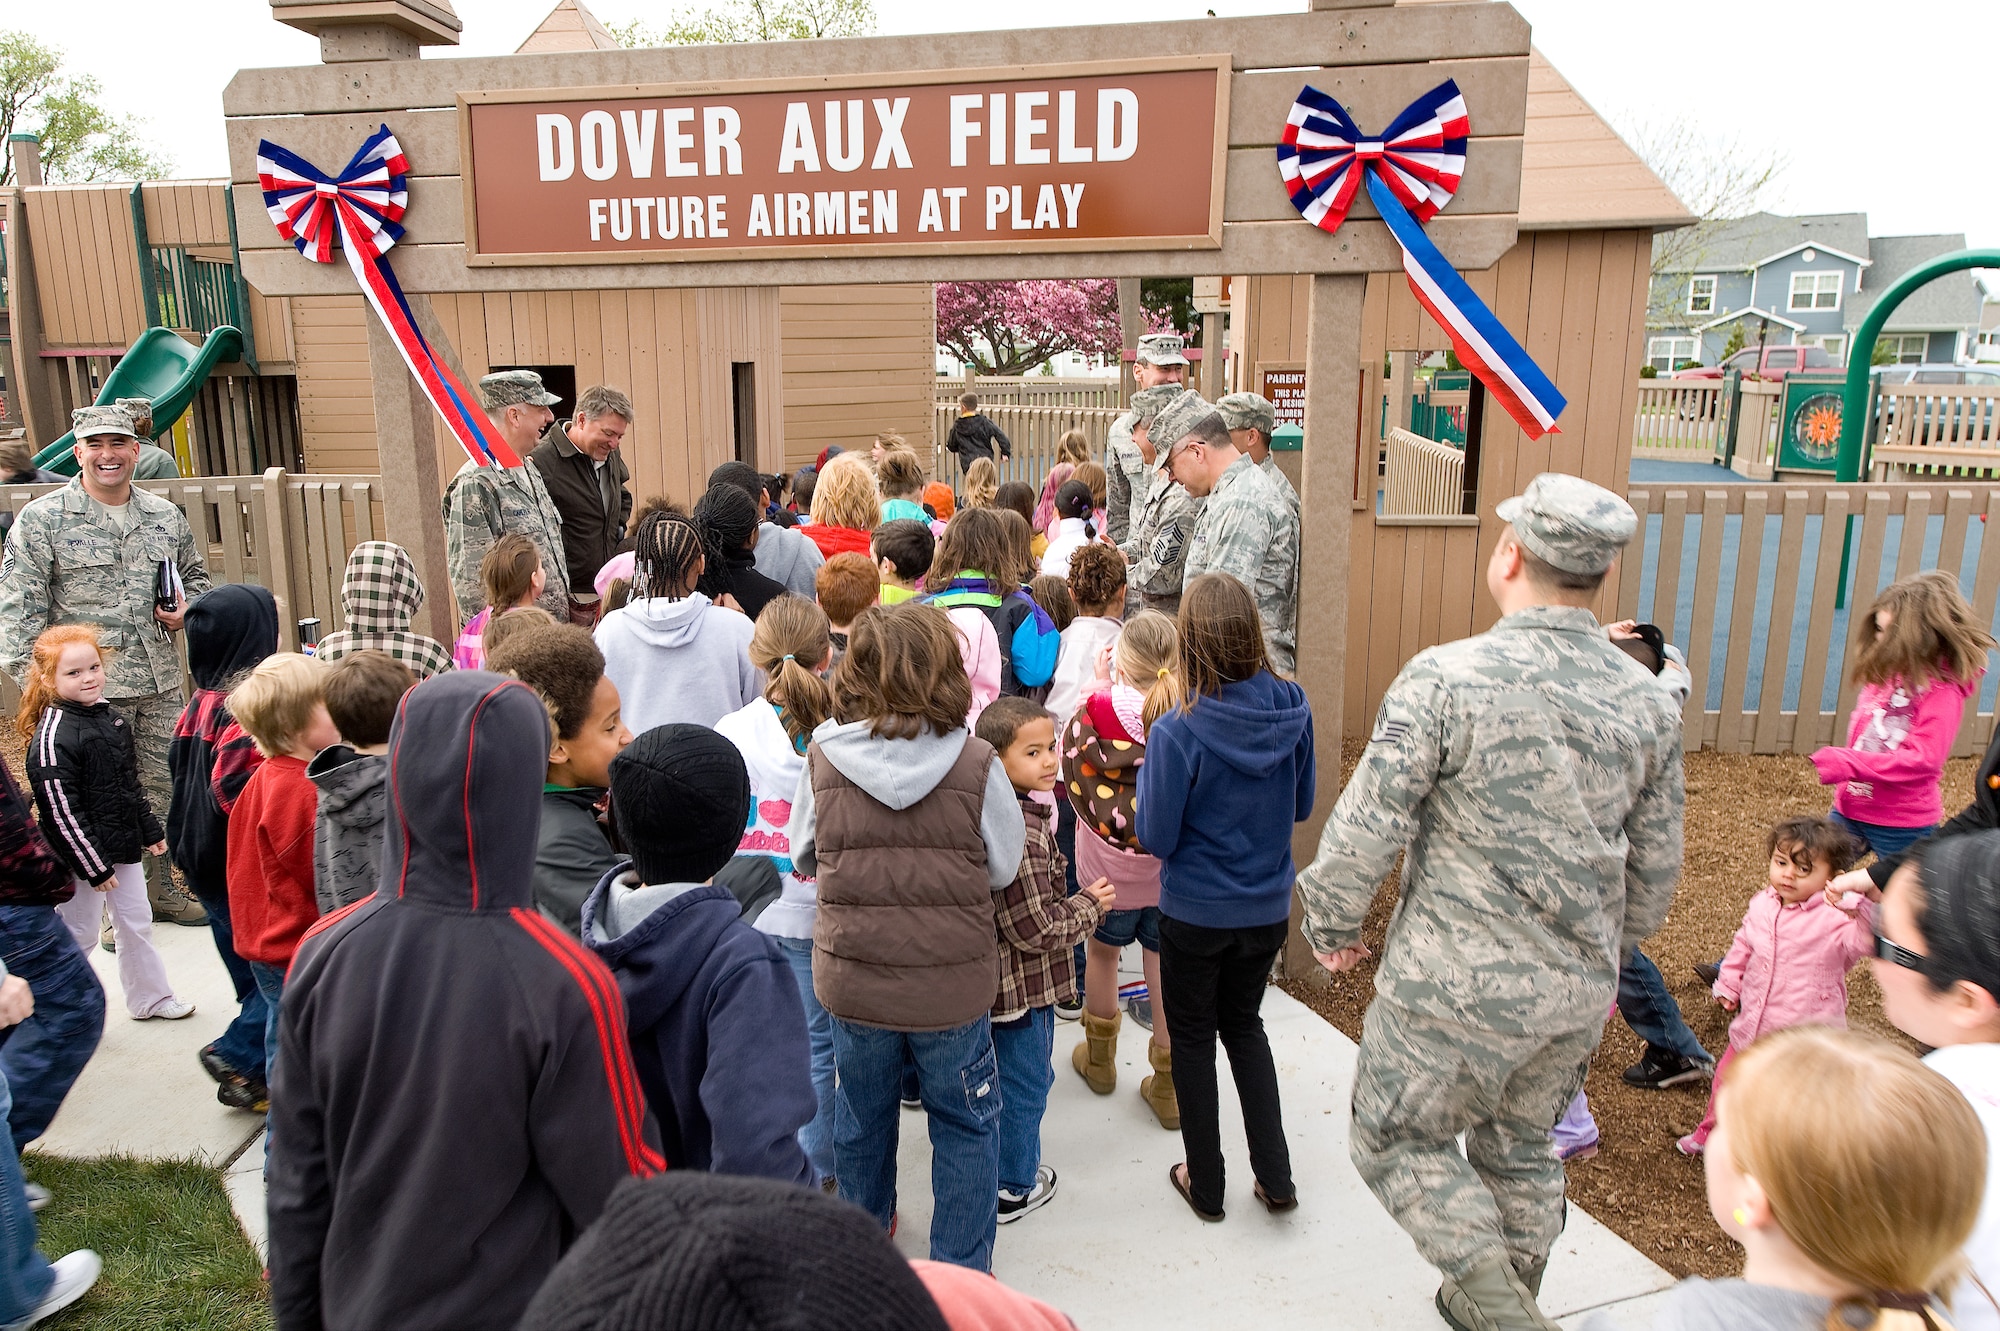 Children rush the new Dover Aux Field April 22, 2011, at Liberty Park at Dover Air Force Base, Del. The children rushed in only seconds after the ribbon was cut. (U.S. Air Force photo by Airman 1st Class Jacob Morgan)